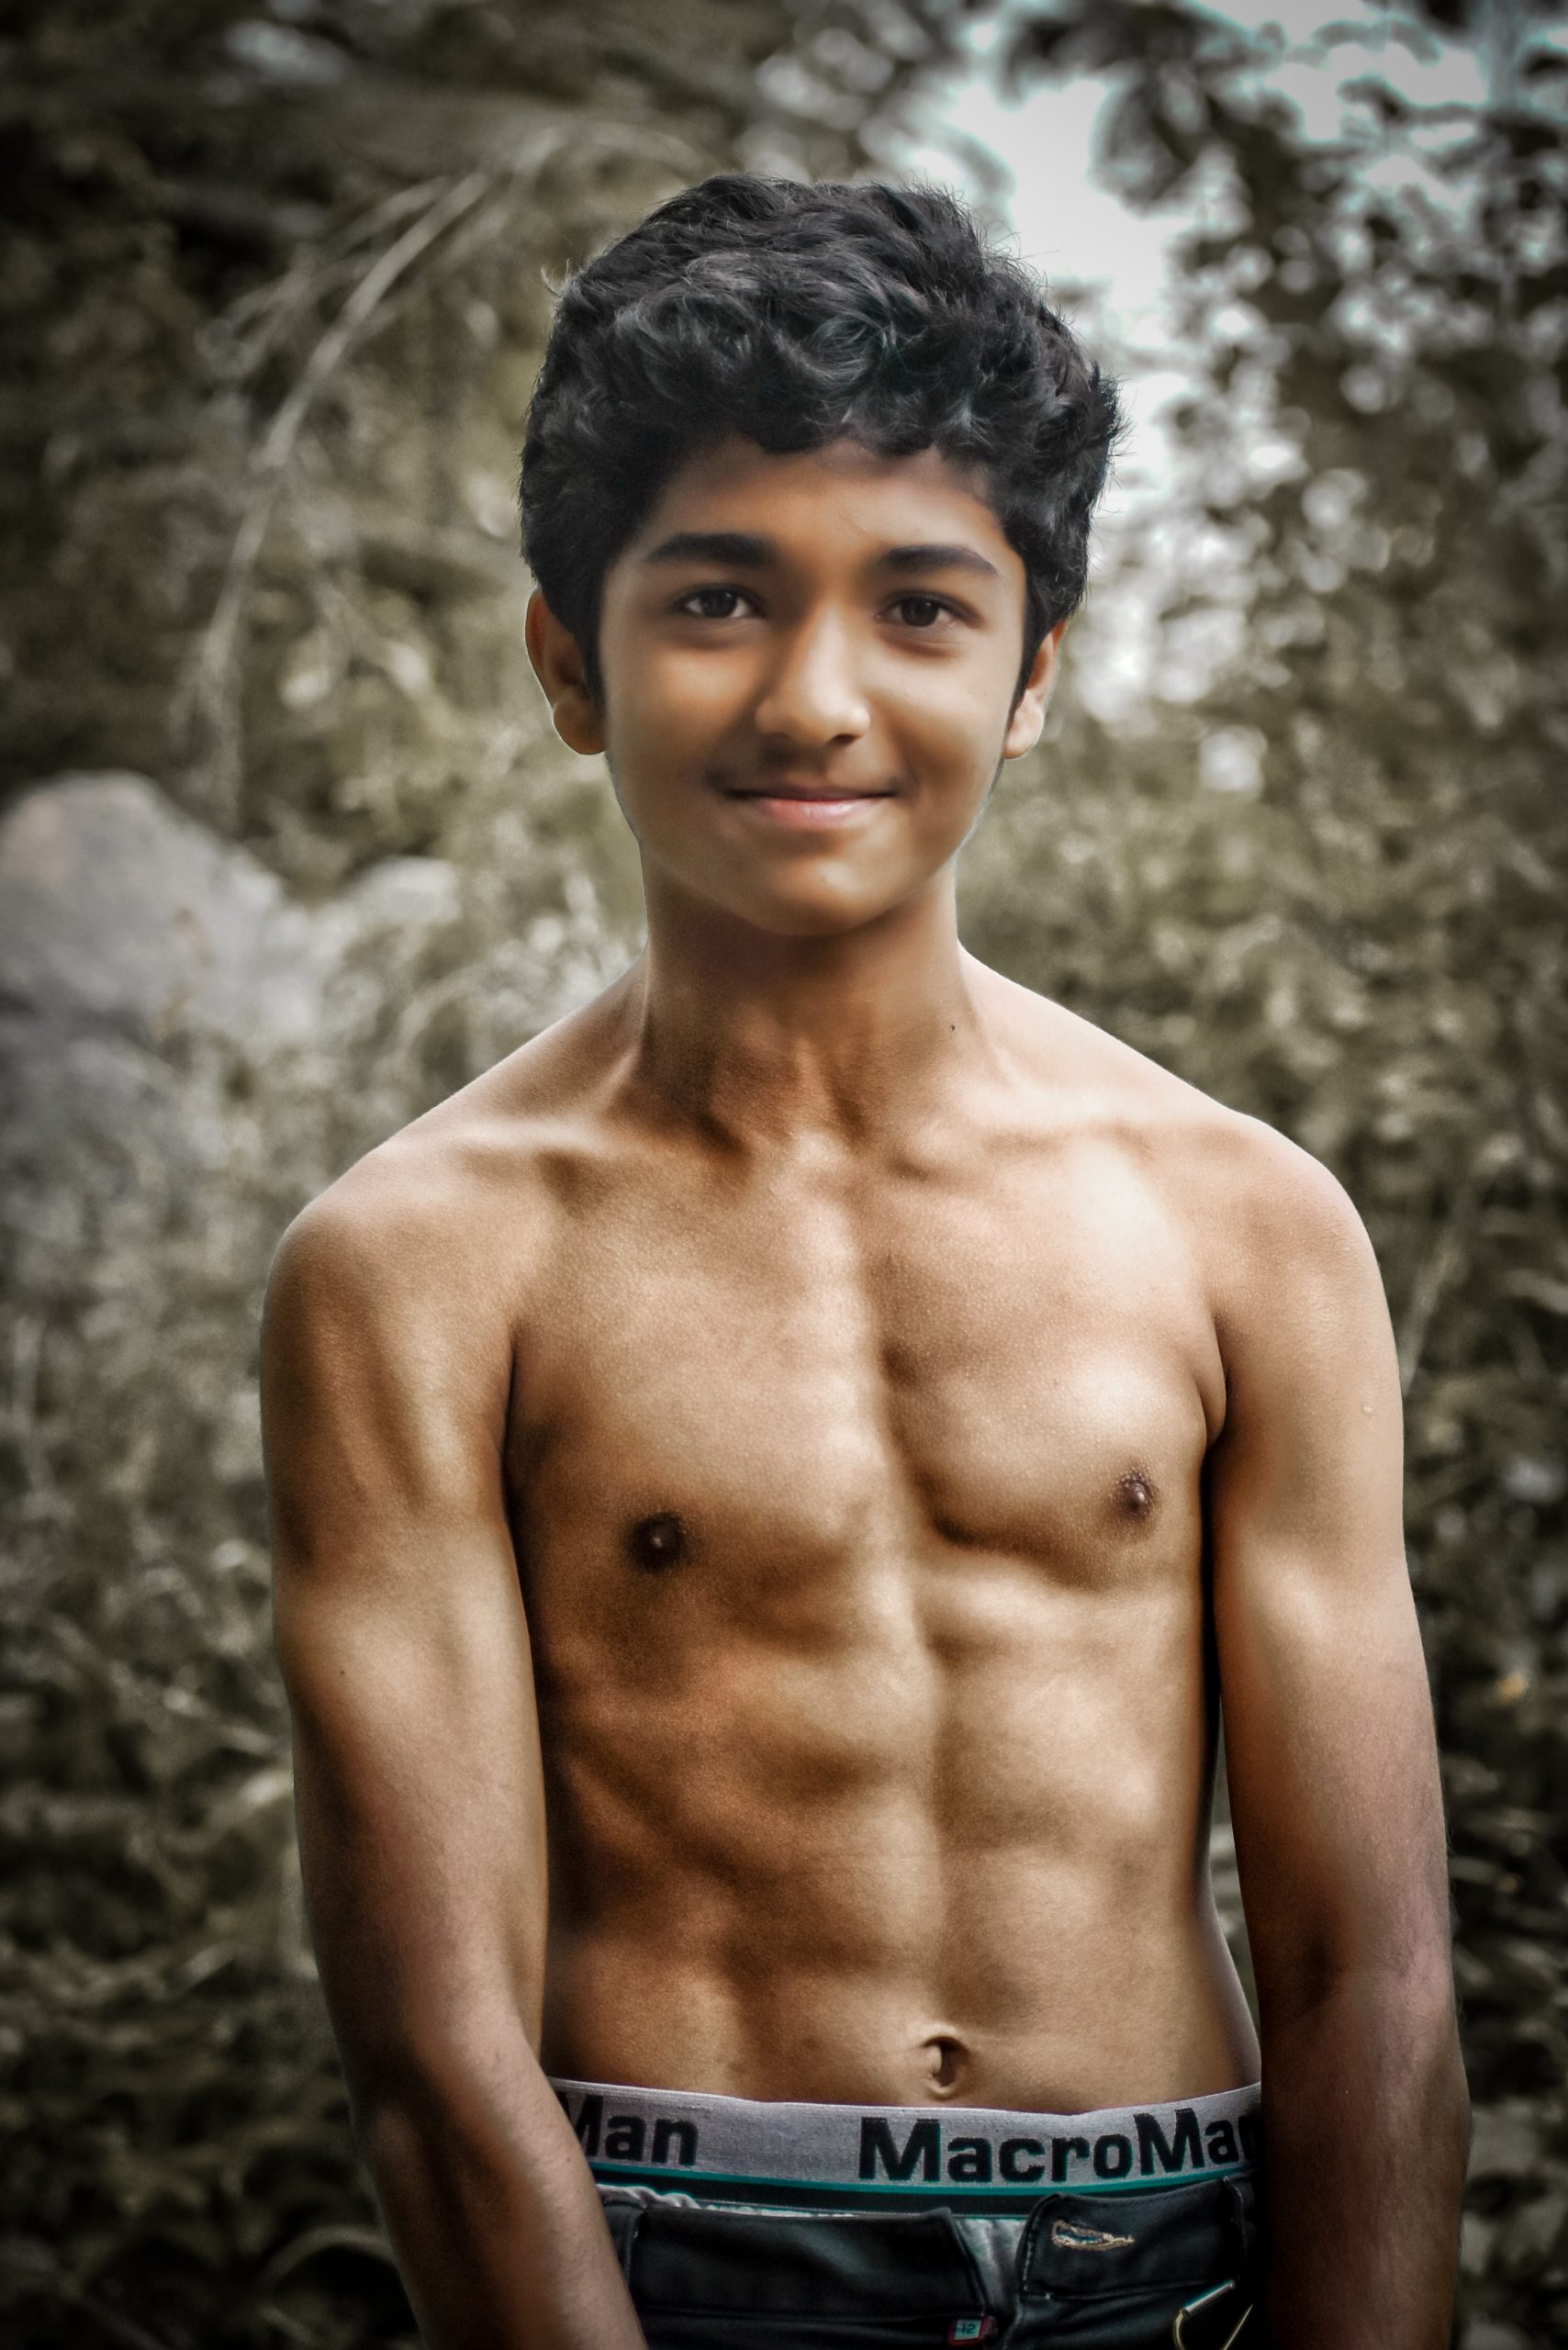 Young boy posing bare chested